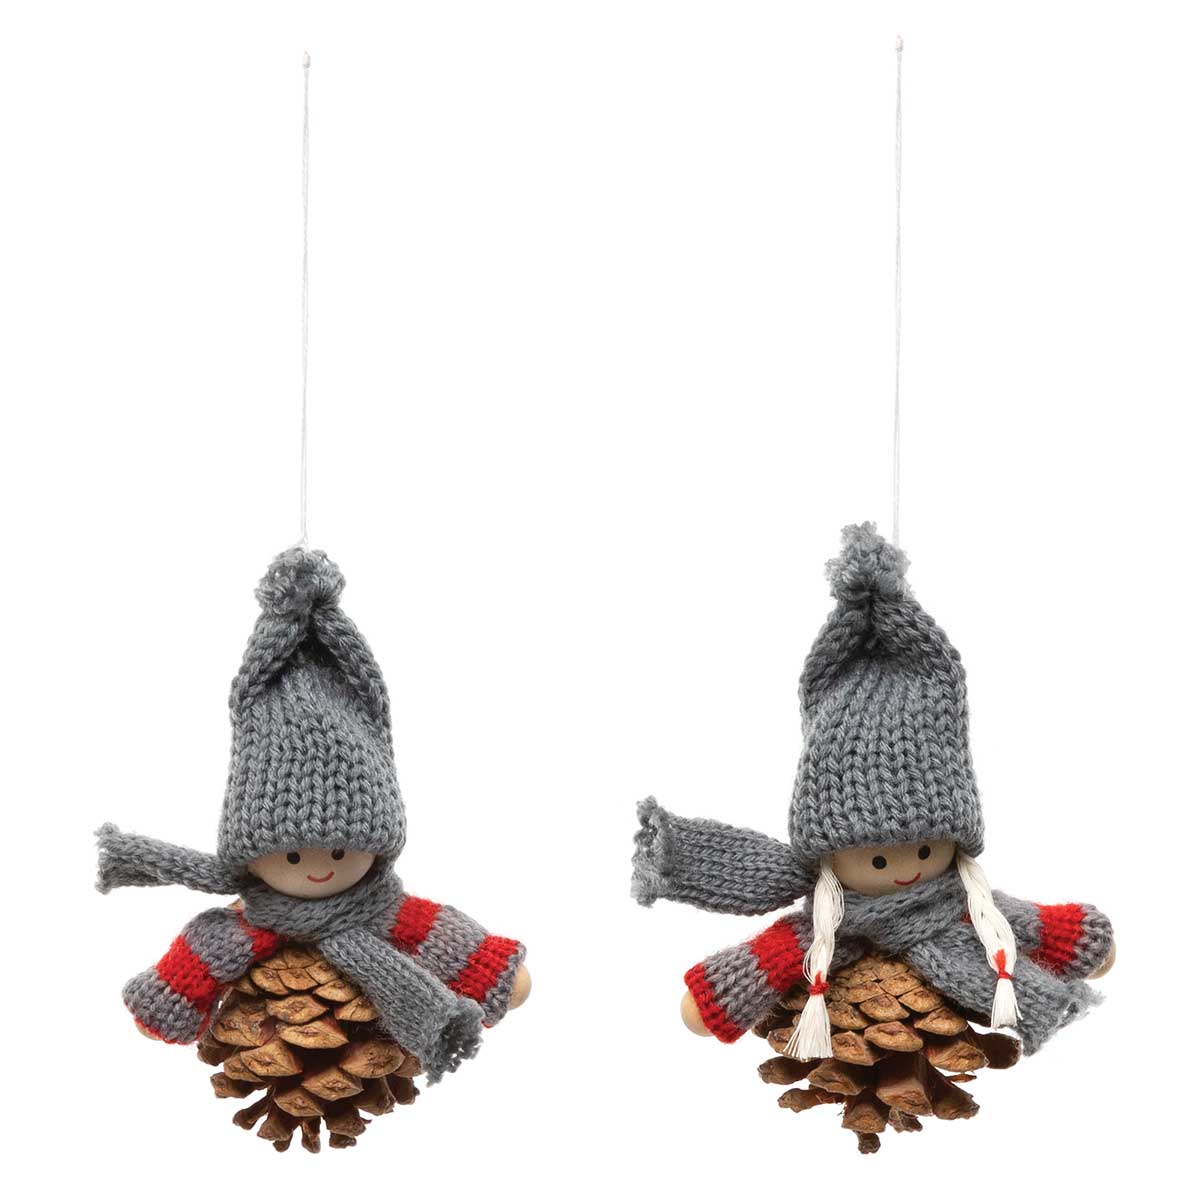 ORNAMENT PINECONE 2 ASSORTED GREY 3IN X 2IN X 4IN